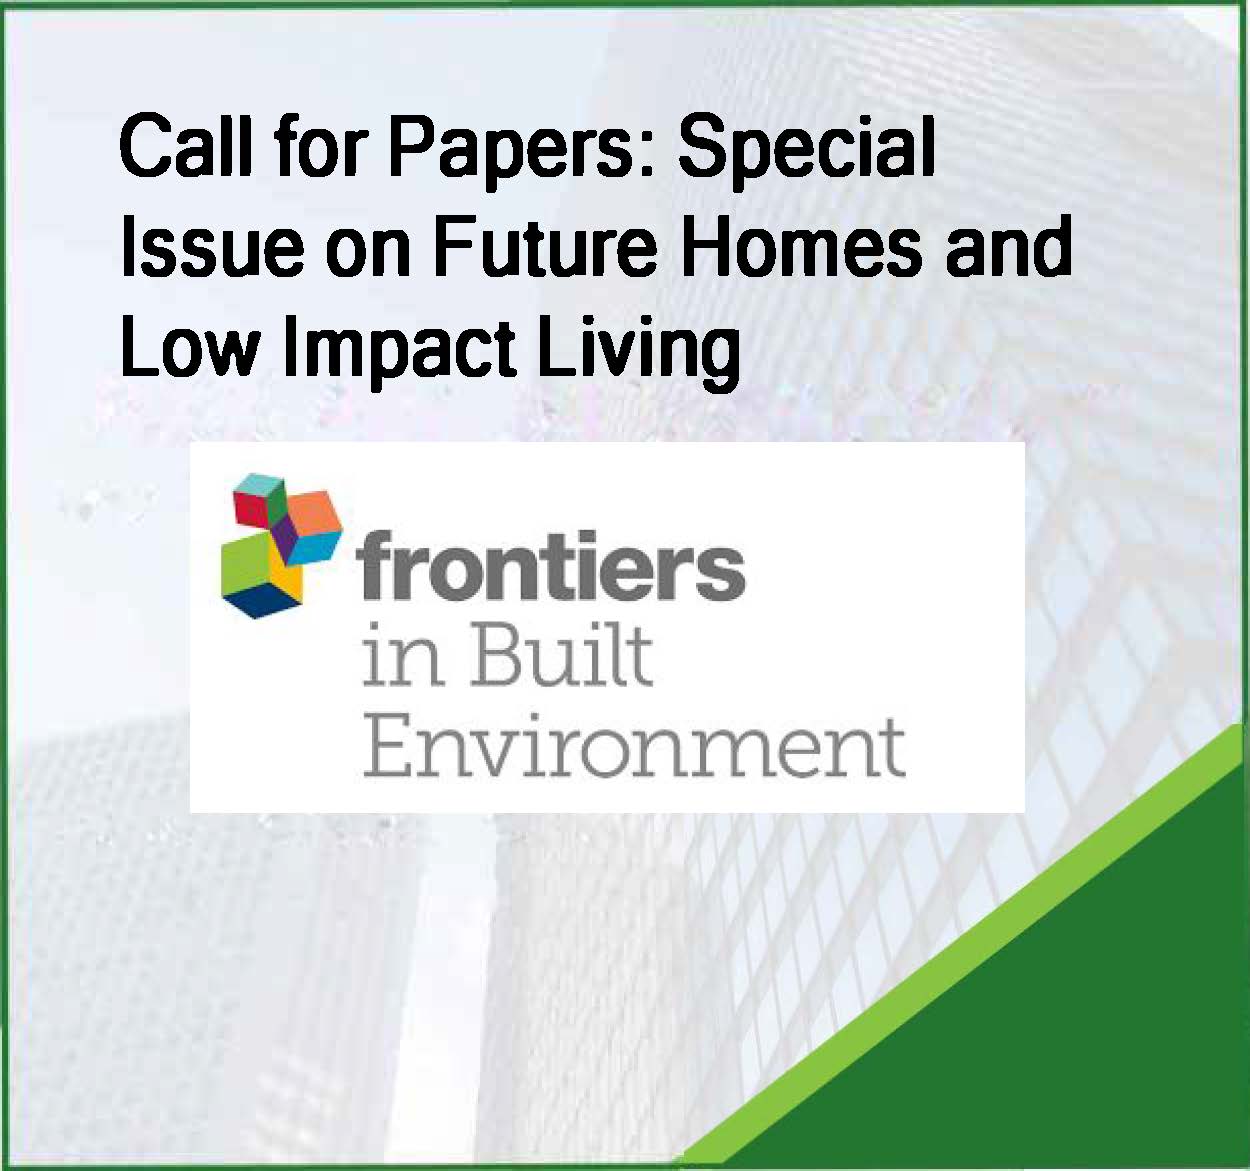 Call for Papers: Special Issue on Future Homes and Low Impact Living